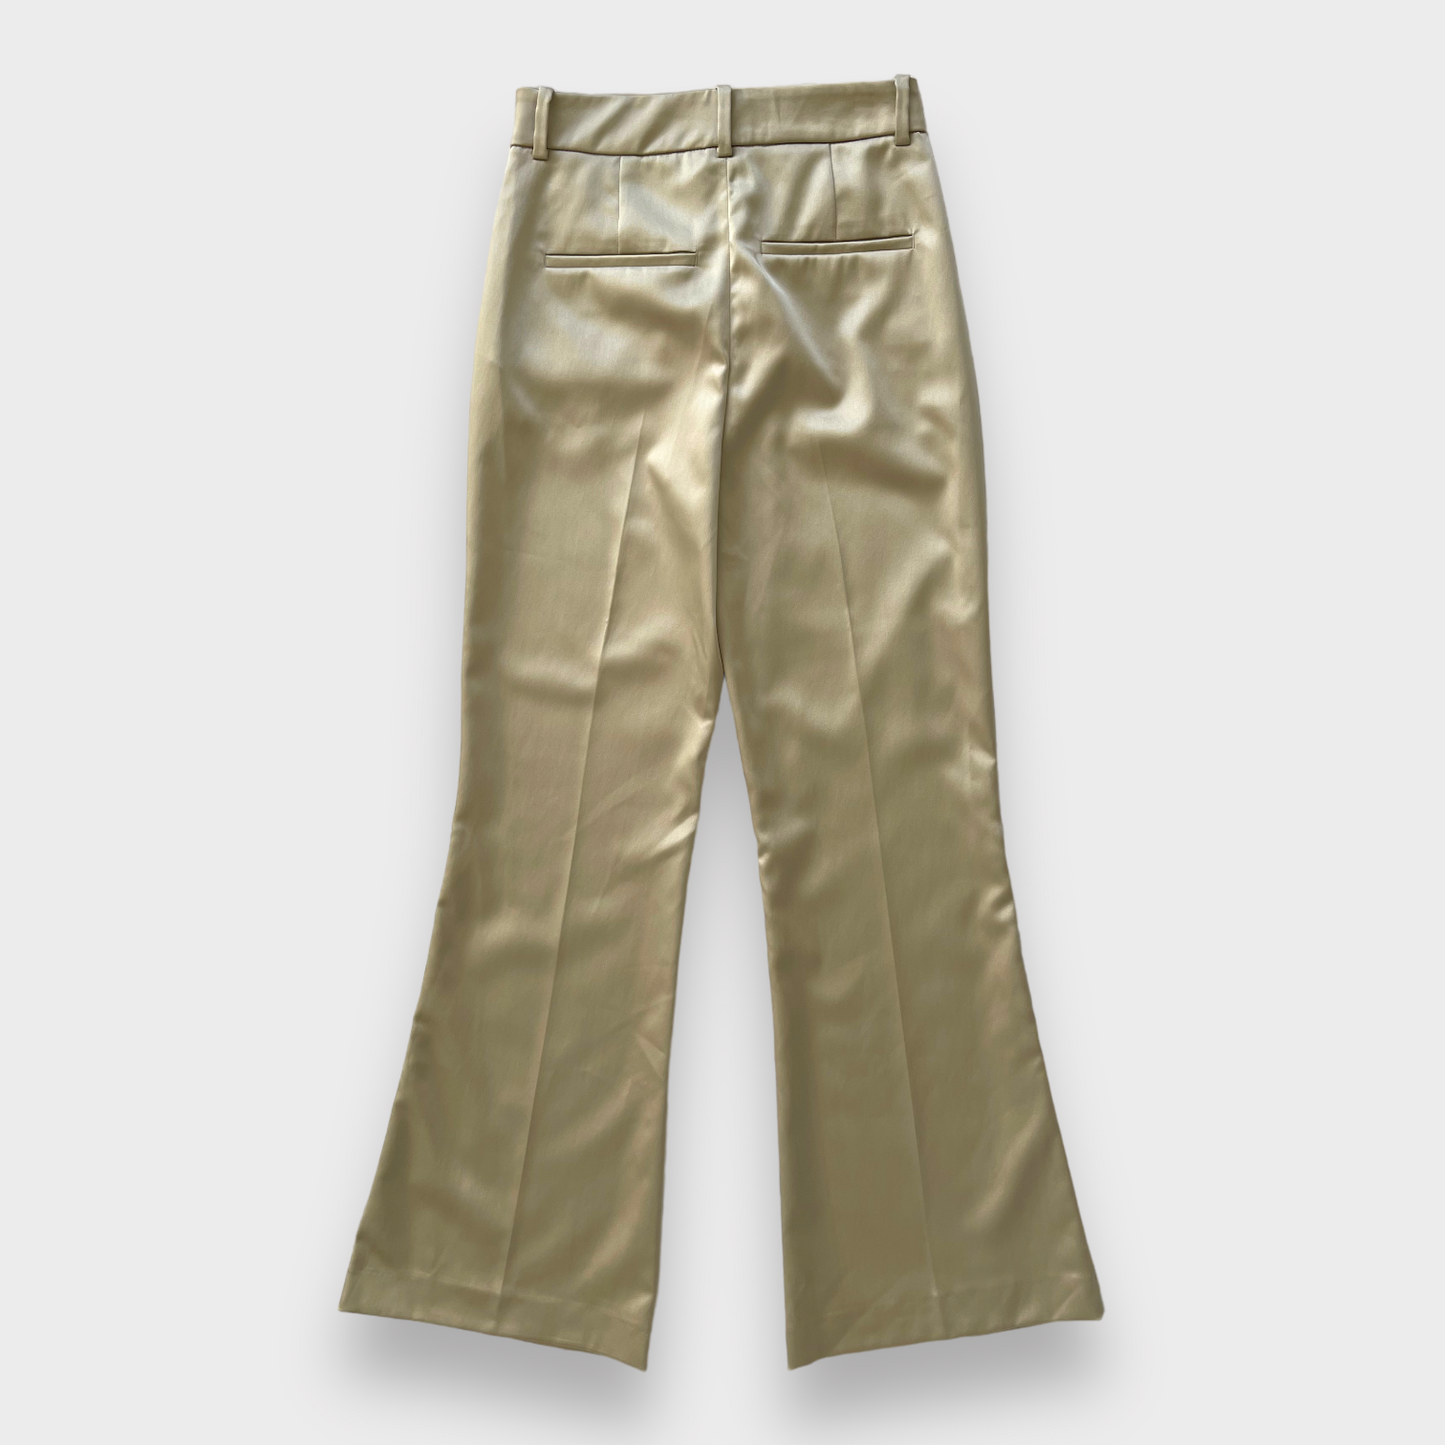 Reiss Mae Satin High-Rise Vintage Flare Retro Champagne Trousers Women's Size 2